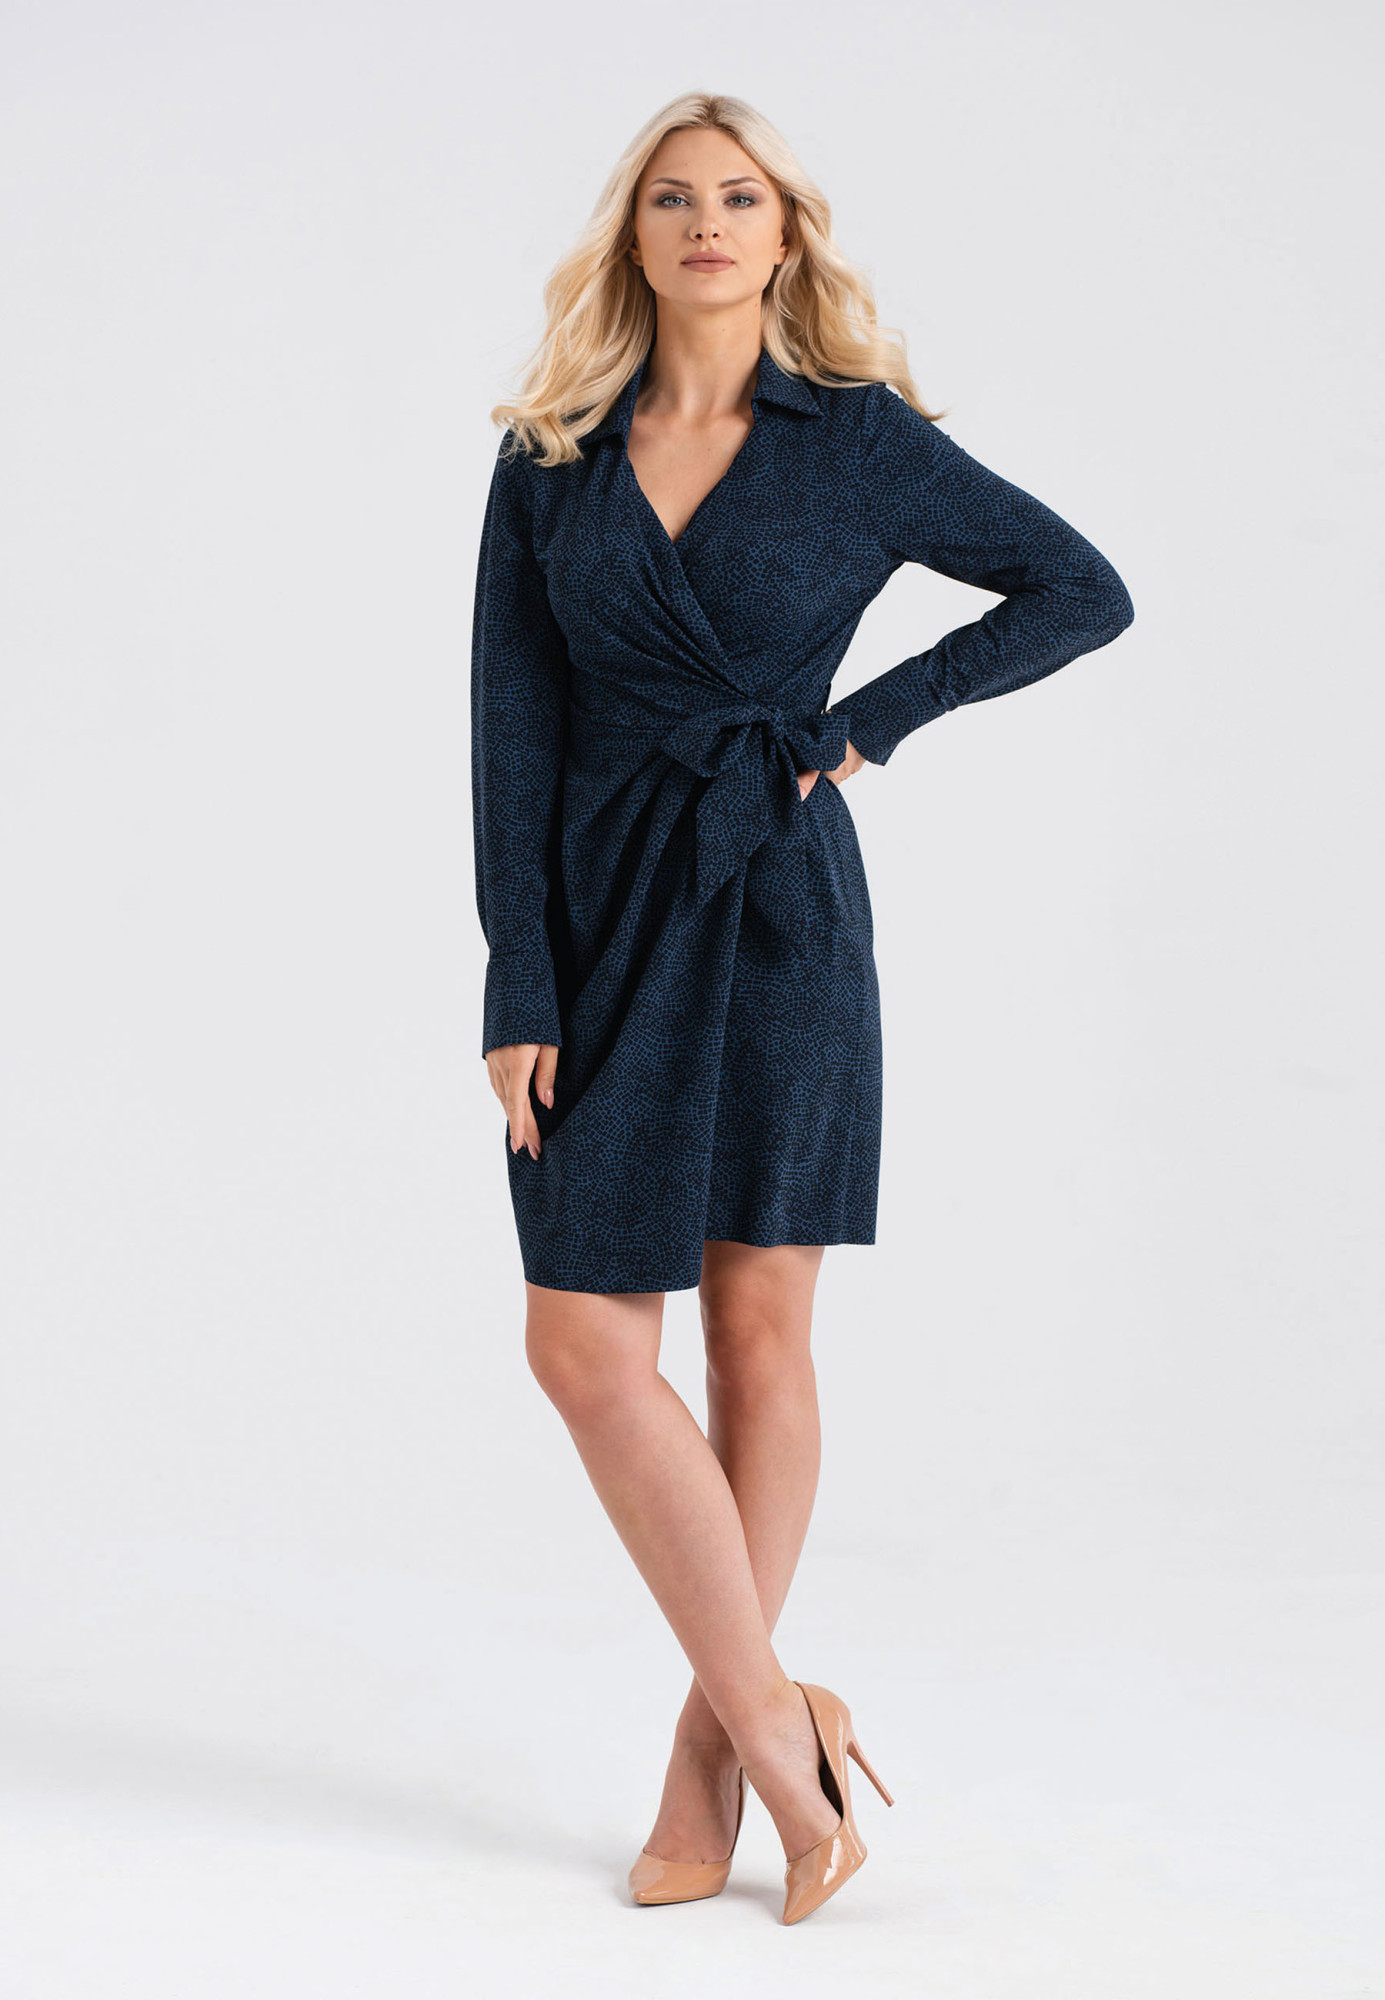 Look Made With Love Šaty 743 Beatrice Navy Blue L